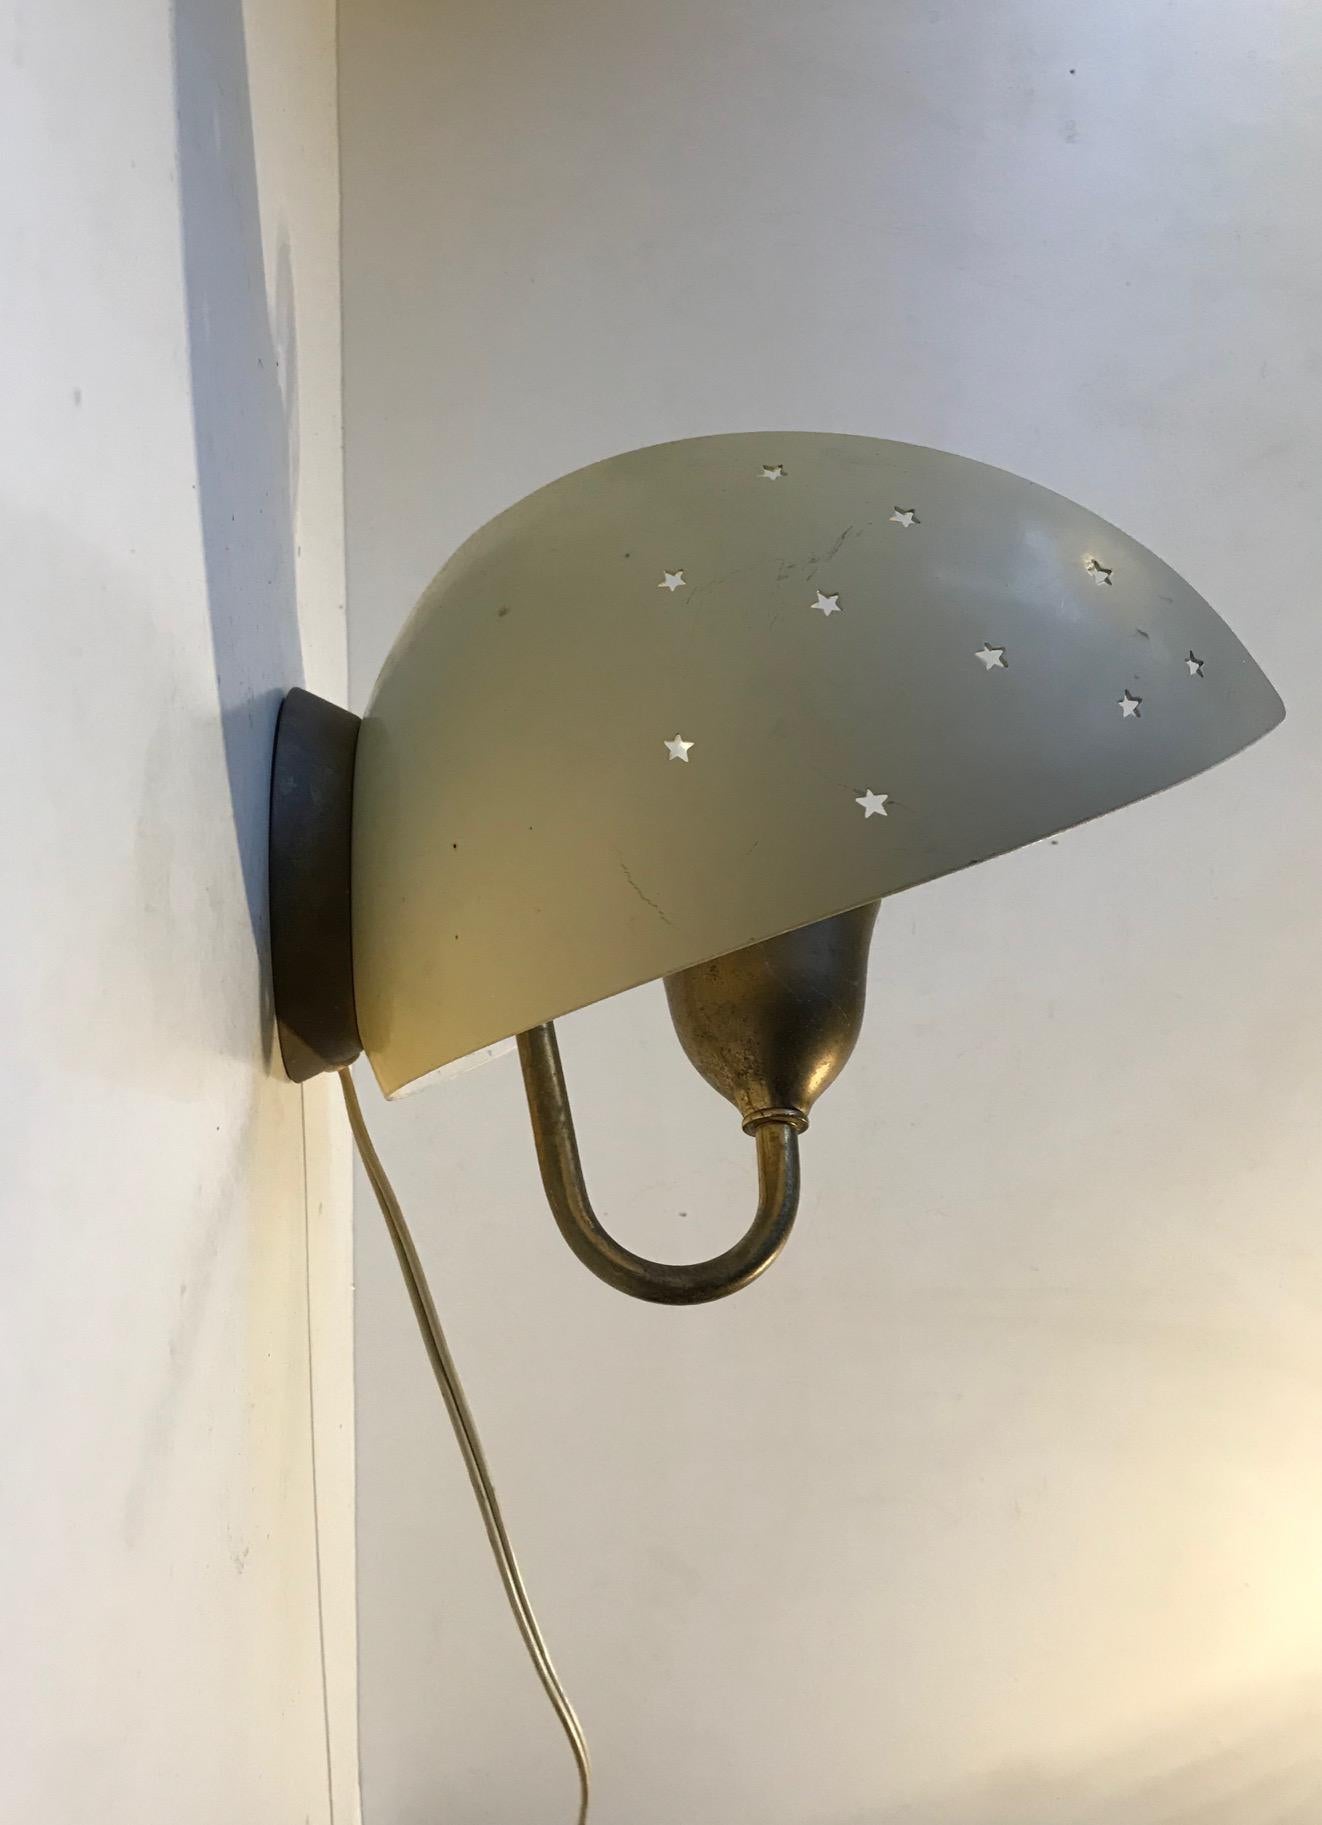 Probably one of the rarest Danish lights. Designed and manufactured by Fog & Mørup in Denmark during the 1930s. Some 20 years before Stilnovo in Italy came up with similar designs. Its construction is very simple. It has a brass base and arm to